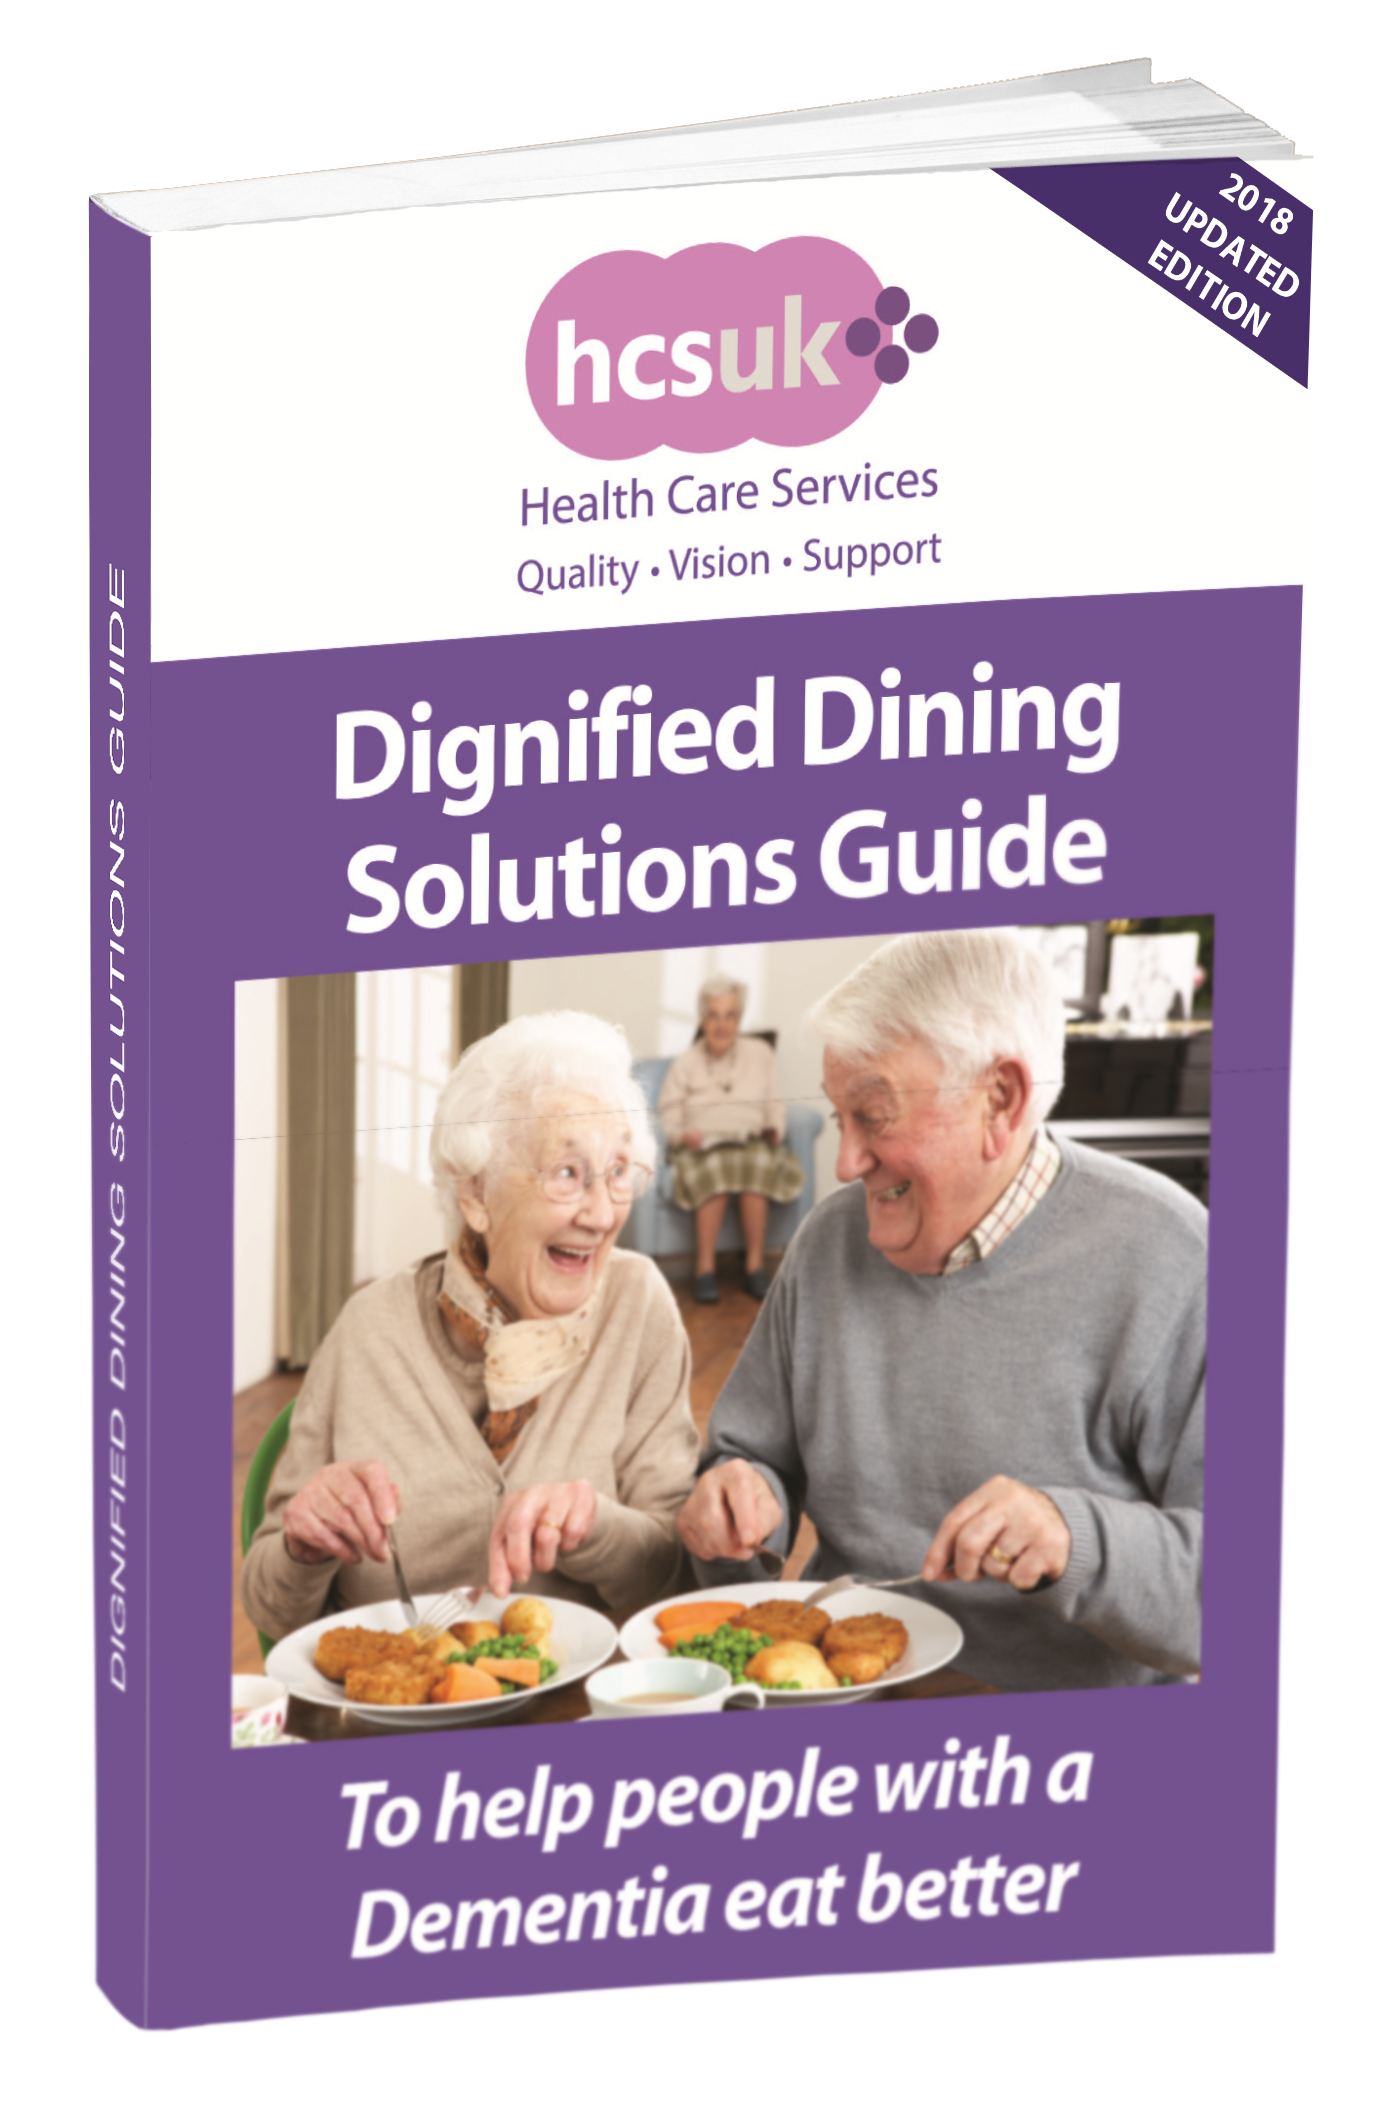 HCS-UK-Dignified-Dining-Solutions-Guide-Mockup